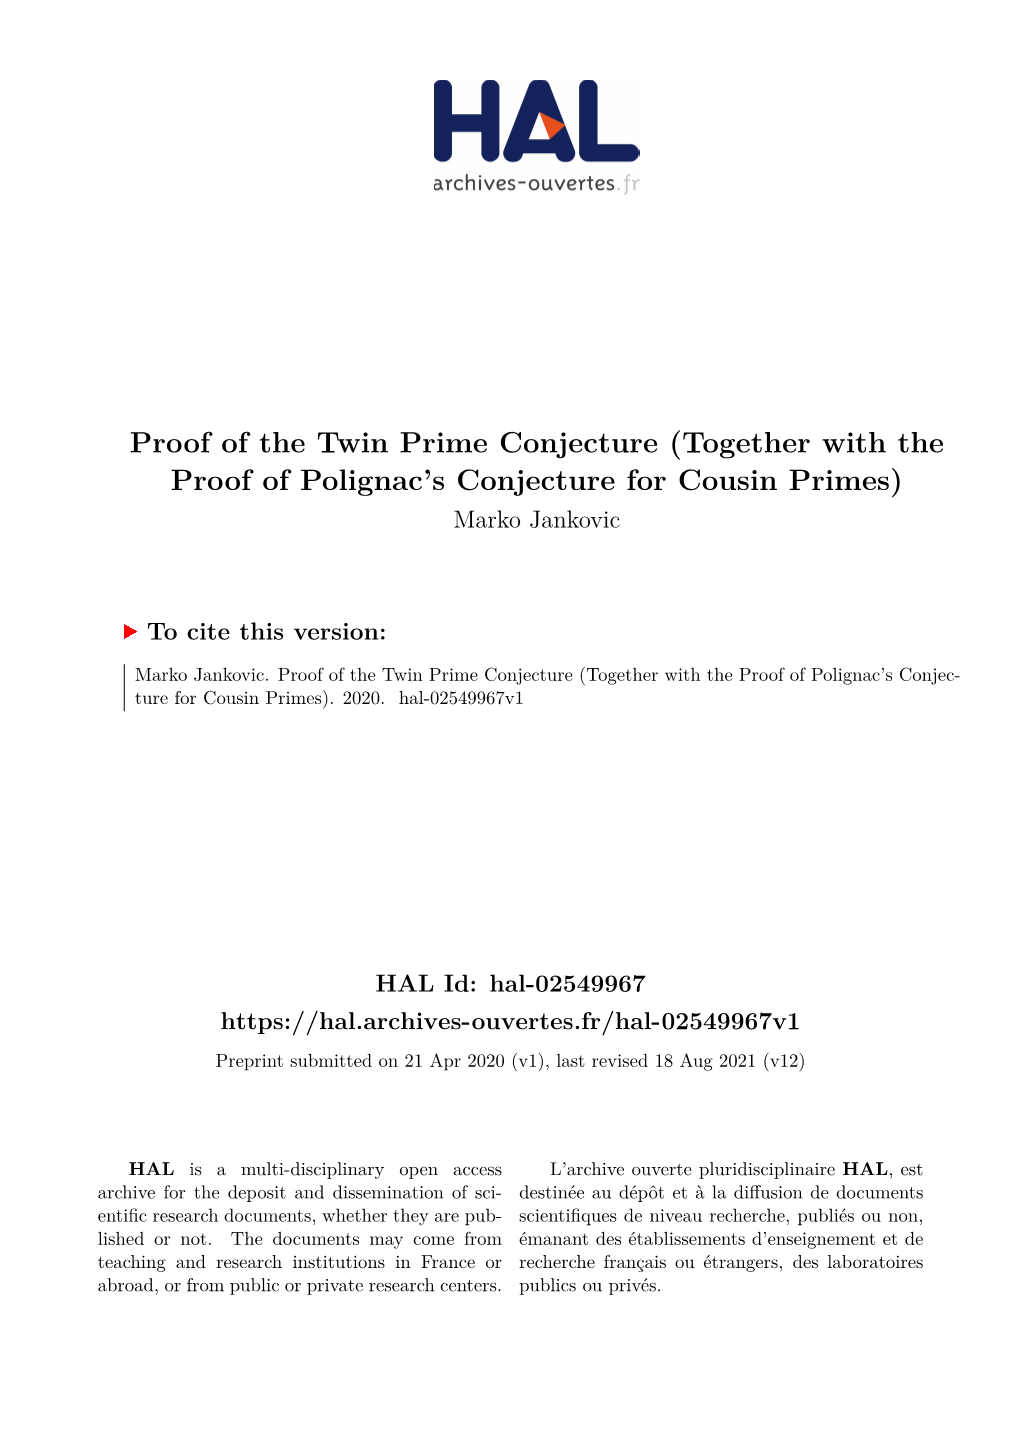 Proof of the Twin Prime Conjecture (Together with the Proof of Polignac’S Conjecture for Cousin Primes) Marko Jankovic